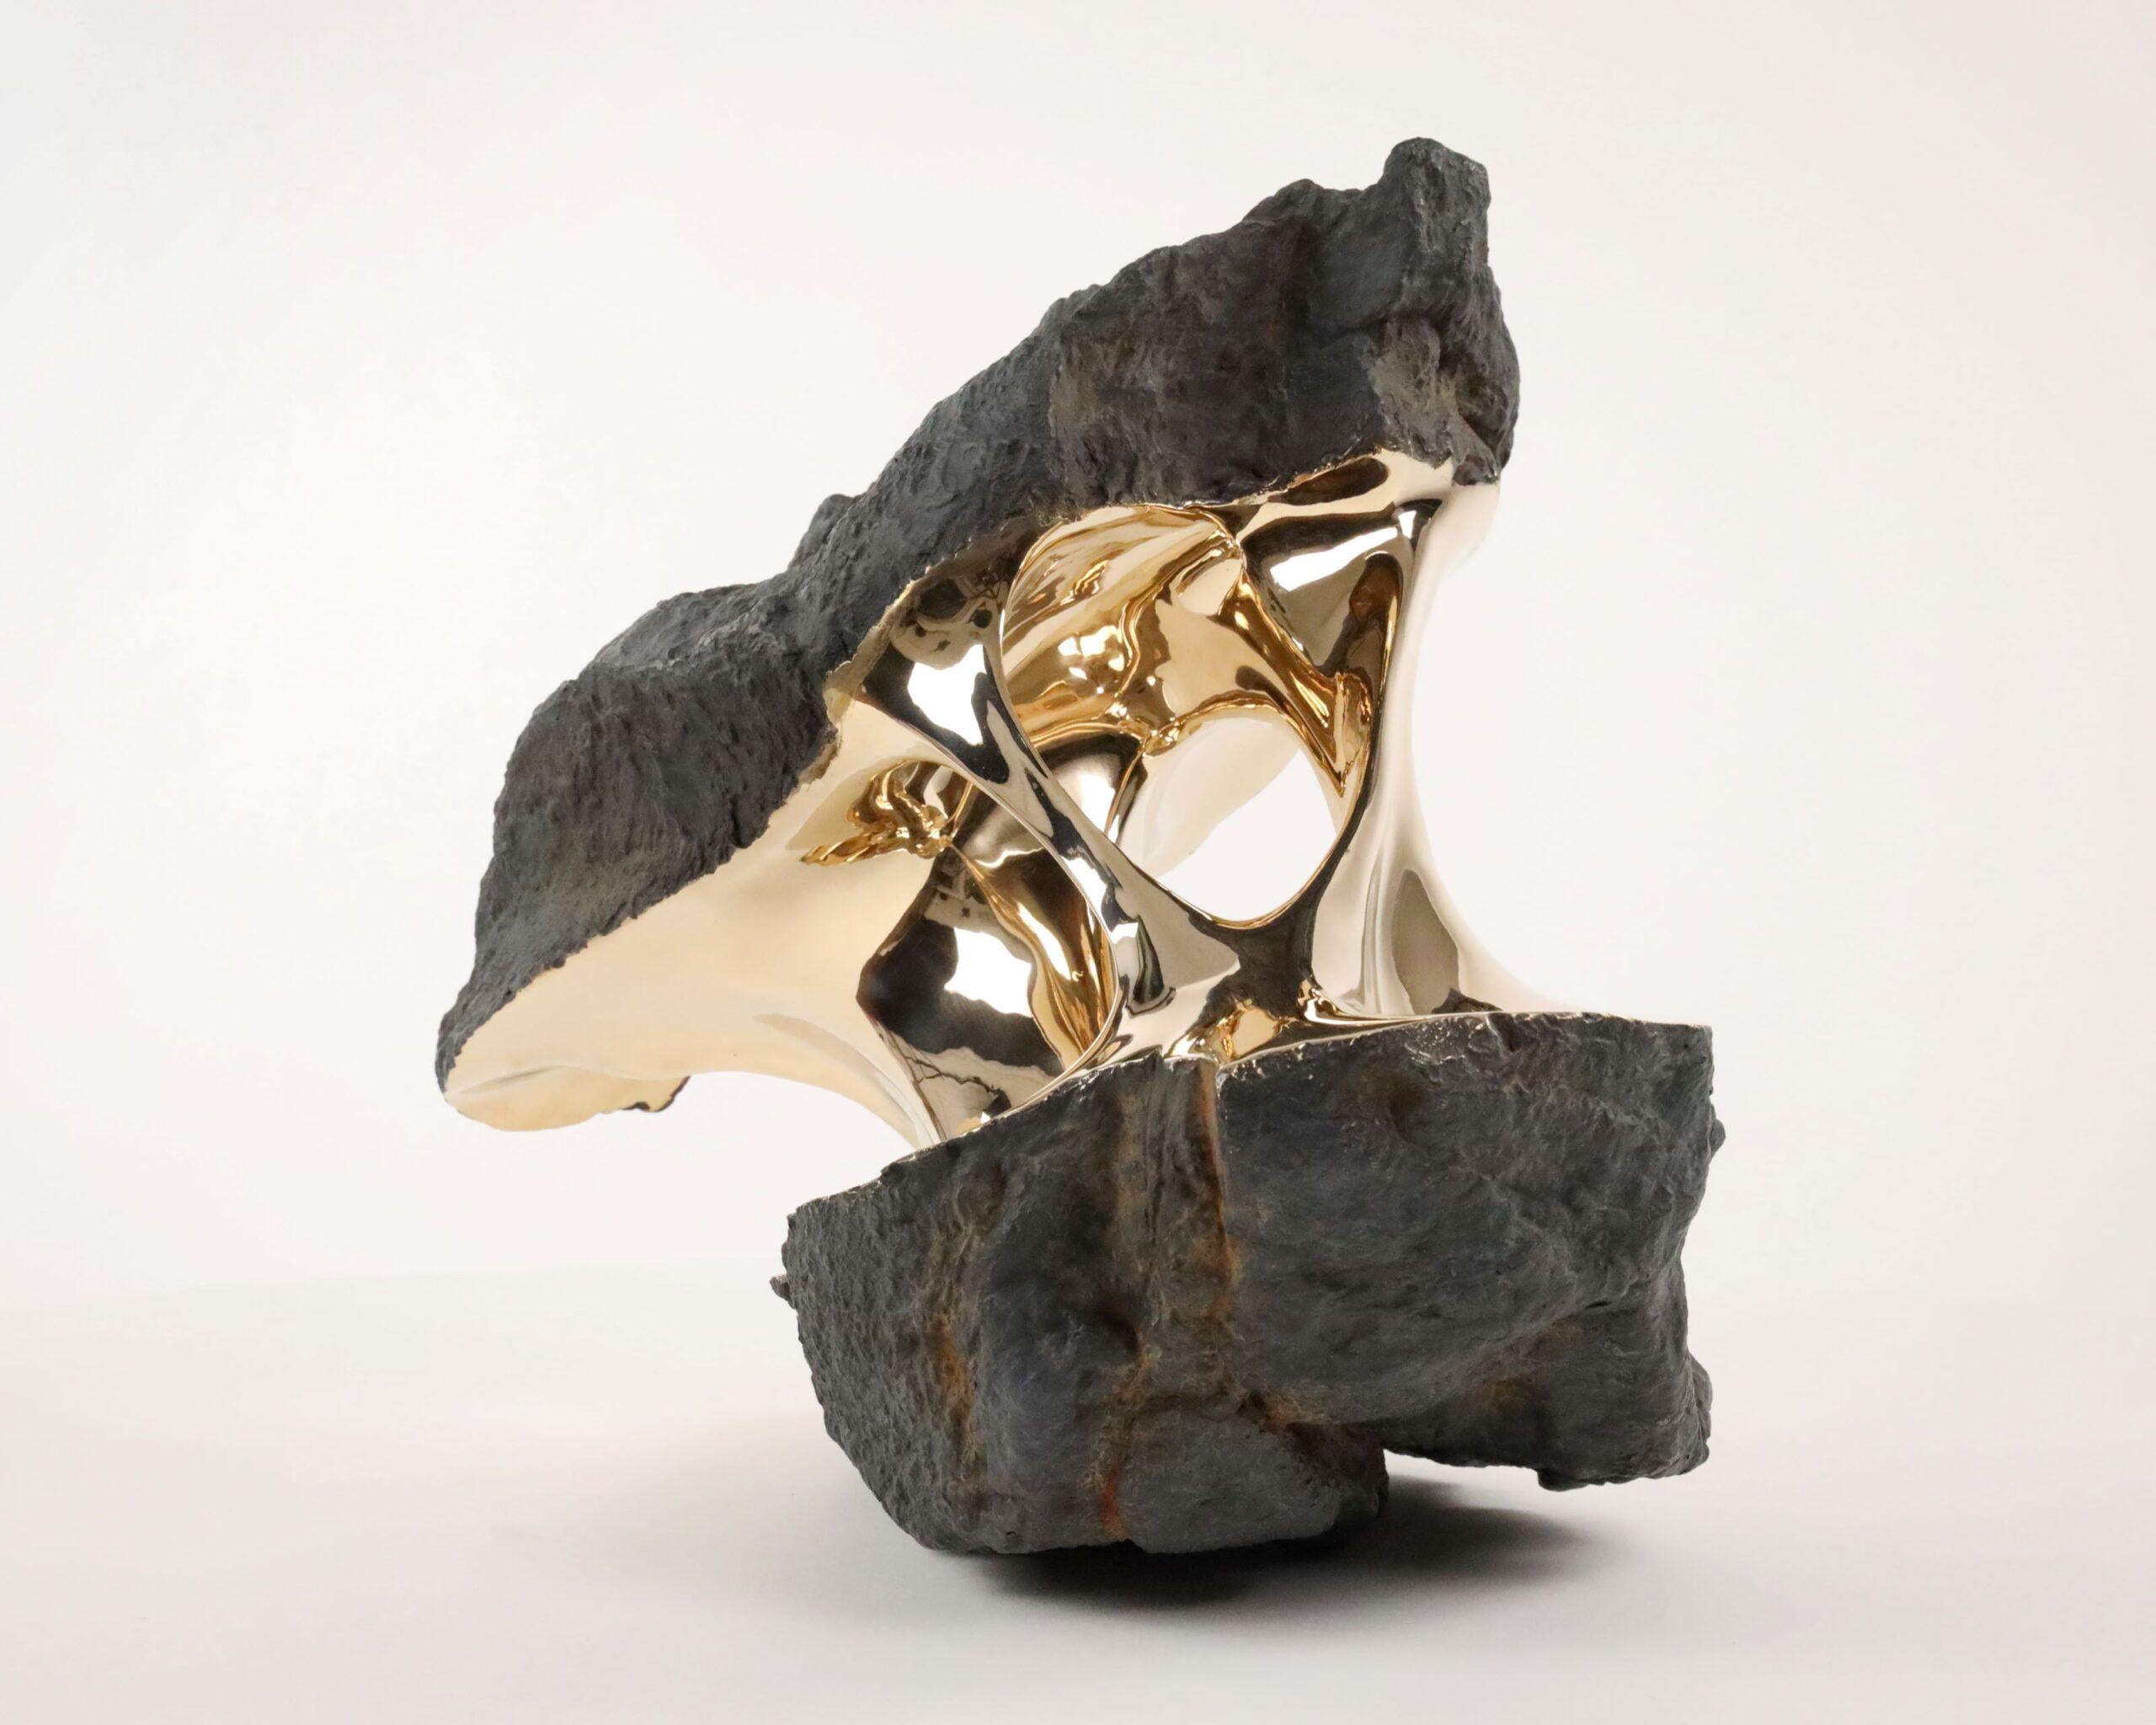 Alchemy by Romain Langlois - Rock-like bronze sculpture, golden, abstract For Sale 6